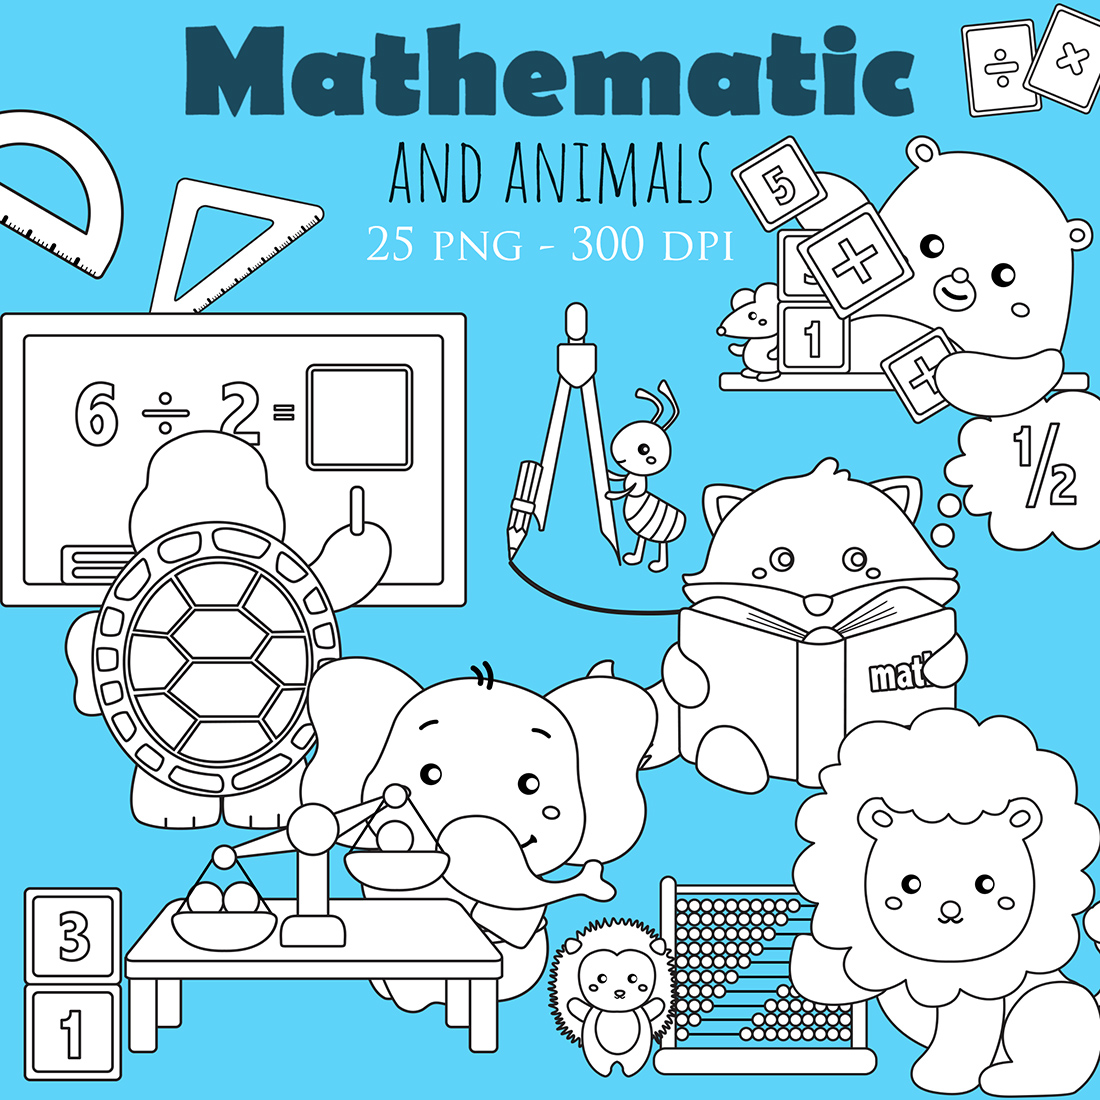 Cute and Funny Mathematics and Animal Learning Education School Formula Science Symbol Number Lesson Studying Cartoon Digital Stamp Outline Black and White cover image.